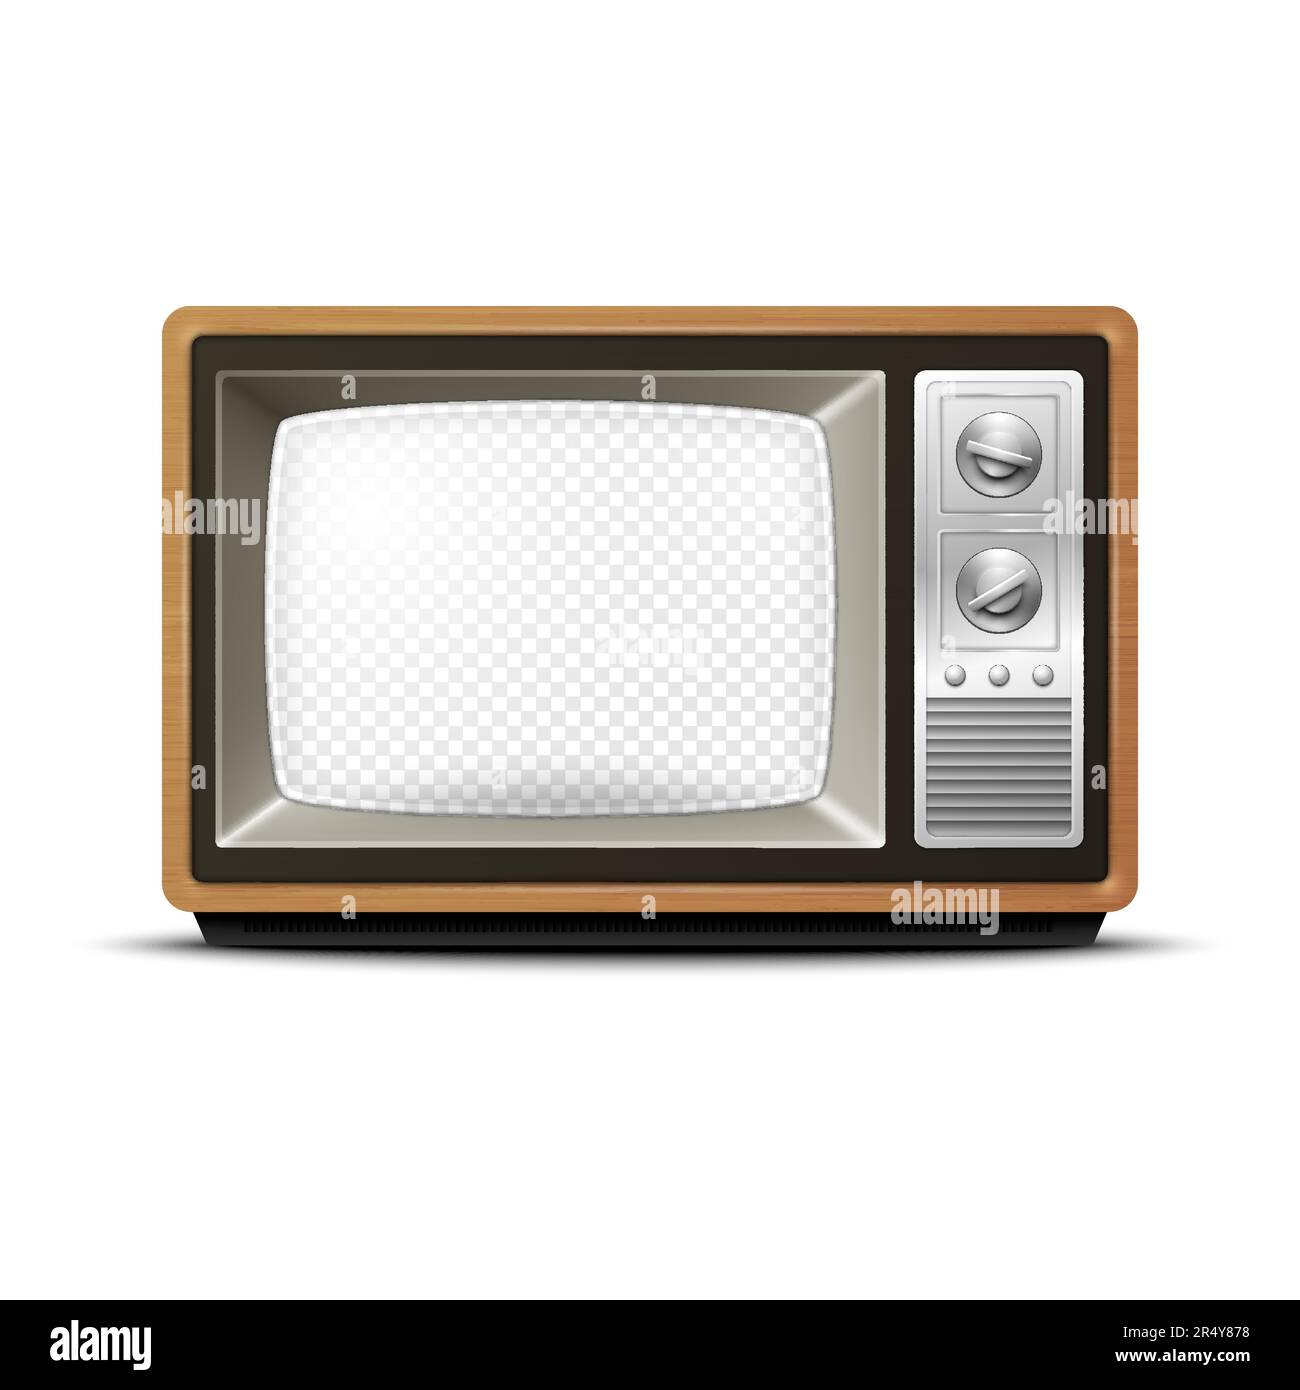 Vector Retro TV Receiver with Wooden Frame and Transparent Screen, Isolated. Home Interior Design Concept. TV Frame Design Template, Border Stock Vector